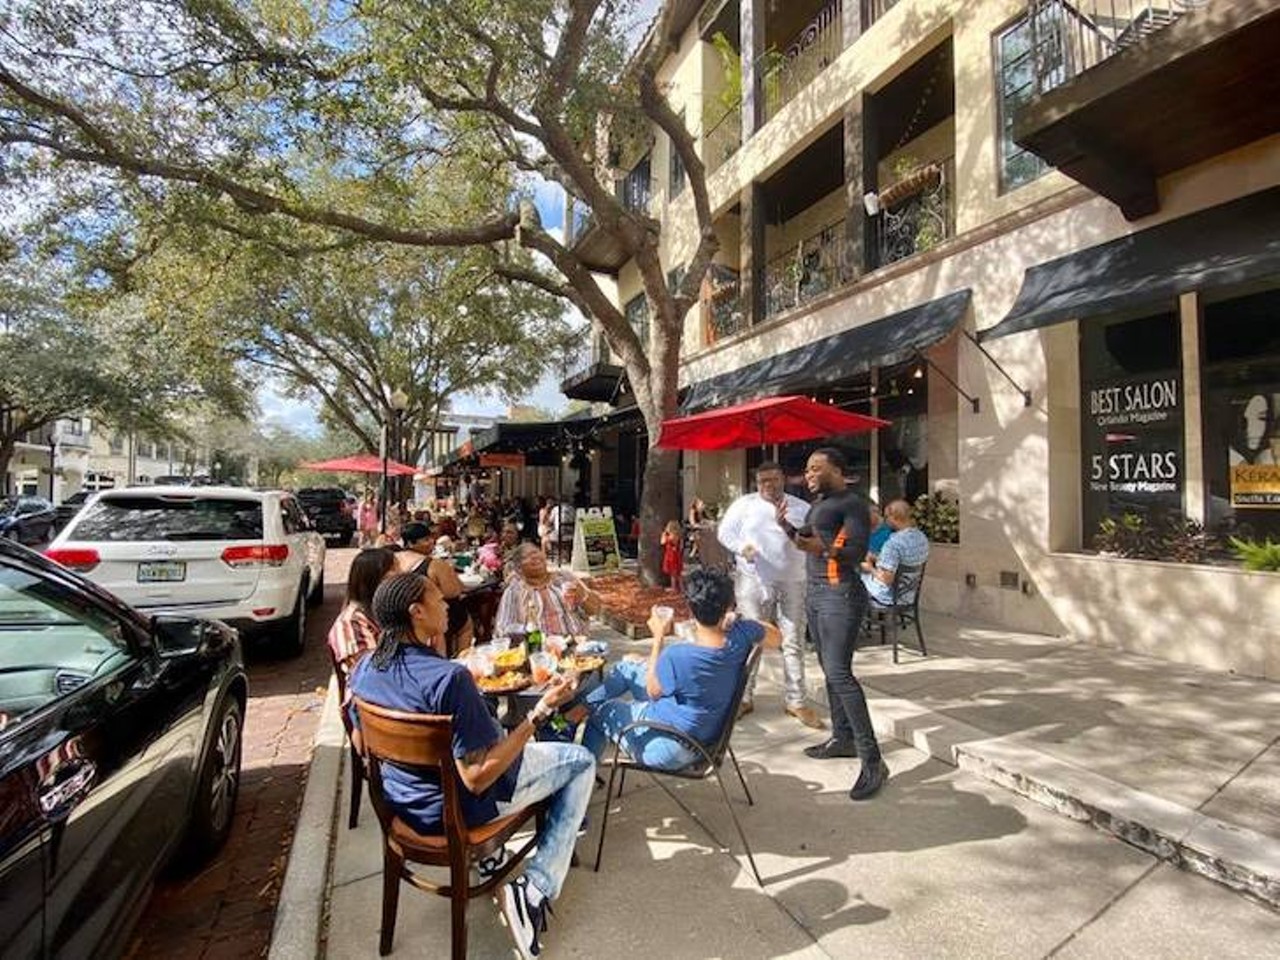 Pepe&#146;s Cantina Winter Park 
433 W. New England Ave., Winter Park, 407-392-4669
Open for dining-in with tables spaced six-feet apart following social distancing rules. Outdoor seating in downtown Winter Park is a plus.
Photo via Pepe&#146;s Cantina Winter Park/Facebook